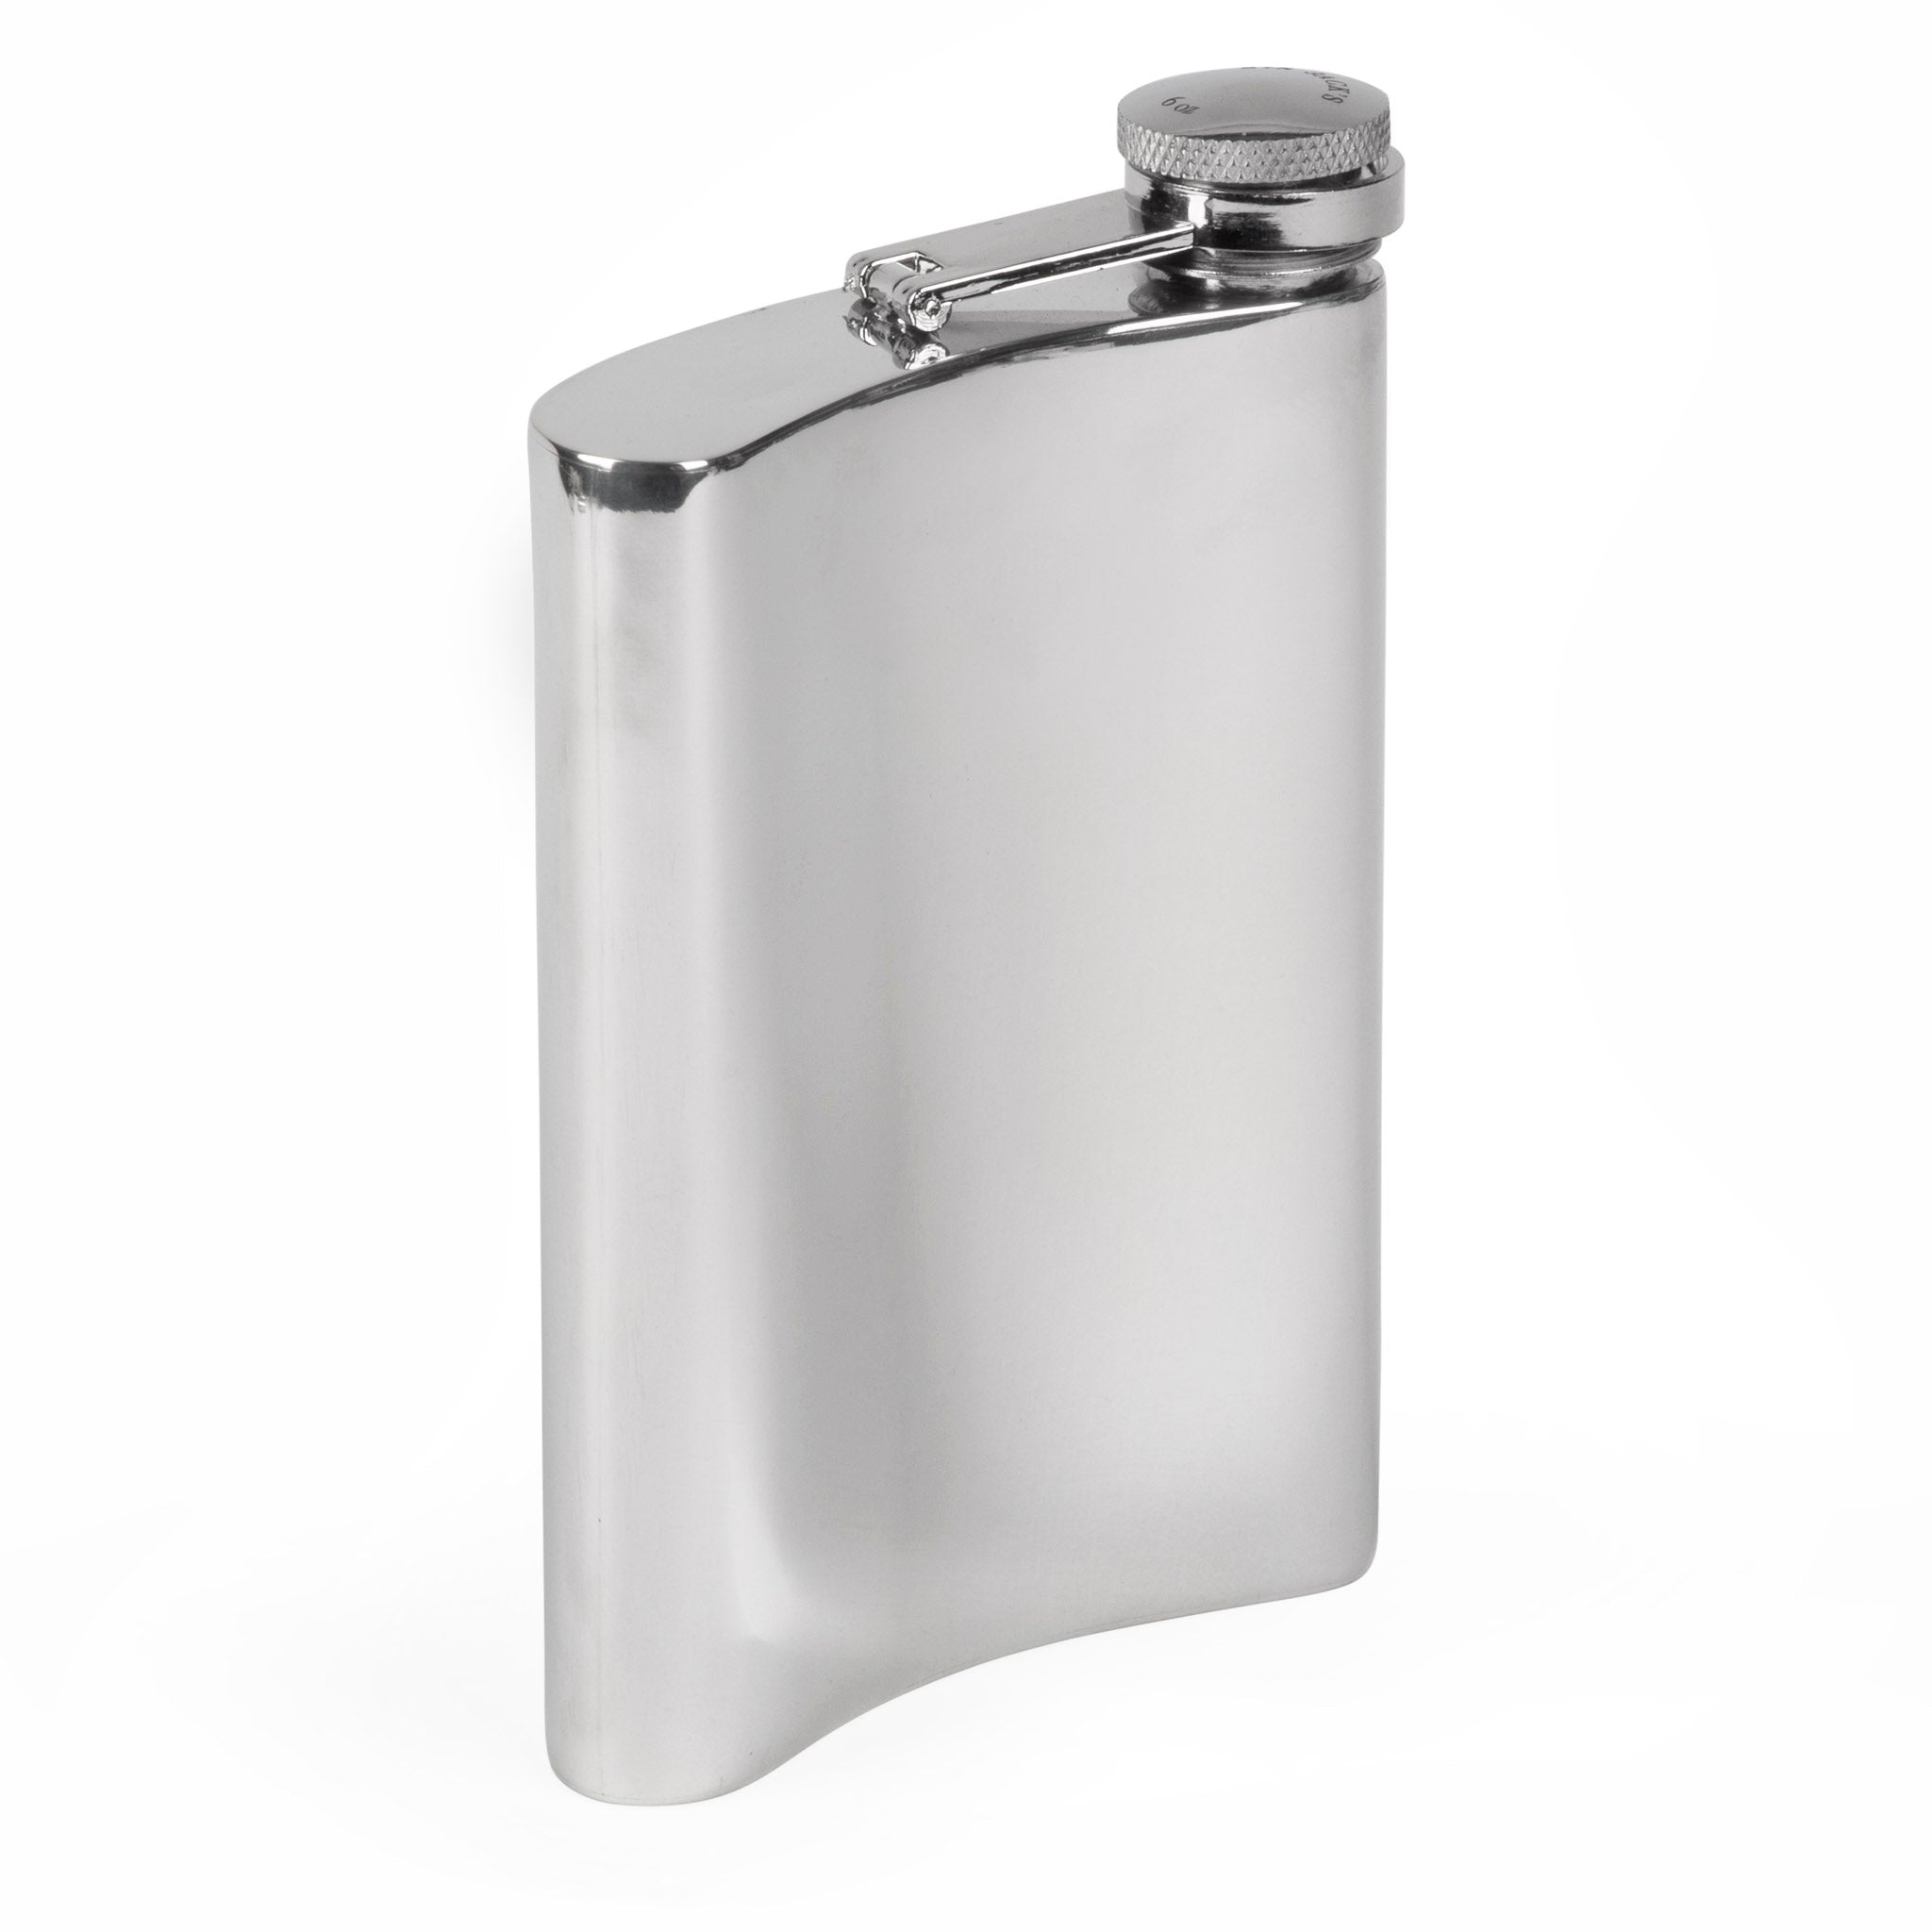 Sir Jack's 6oz Pewter Trench Flask